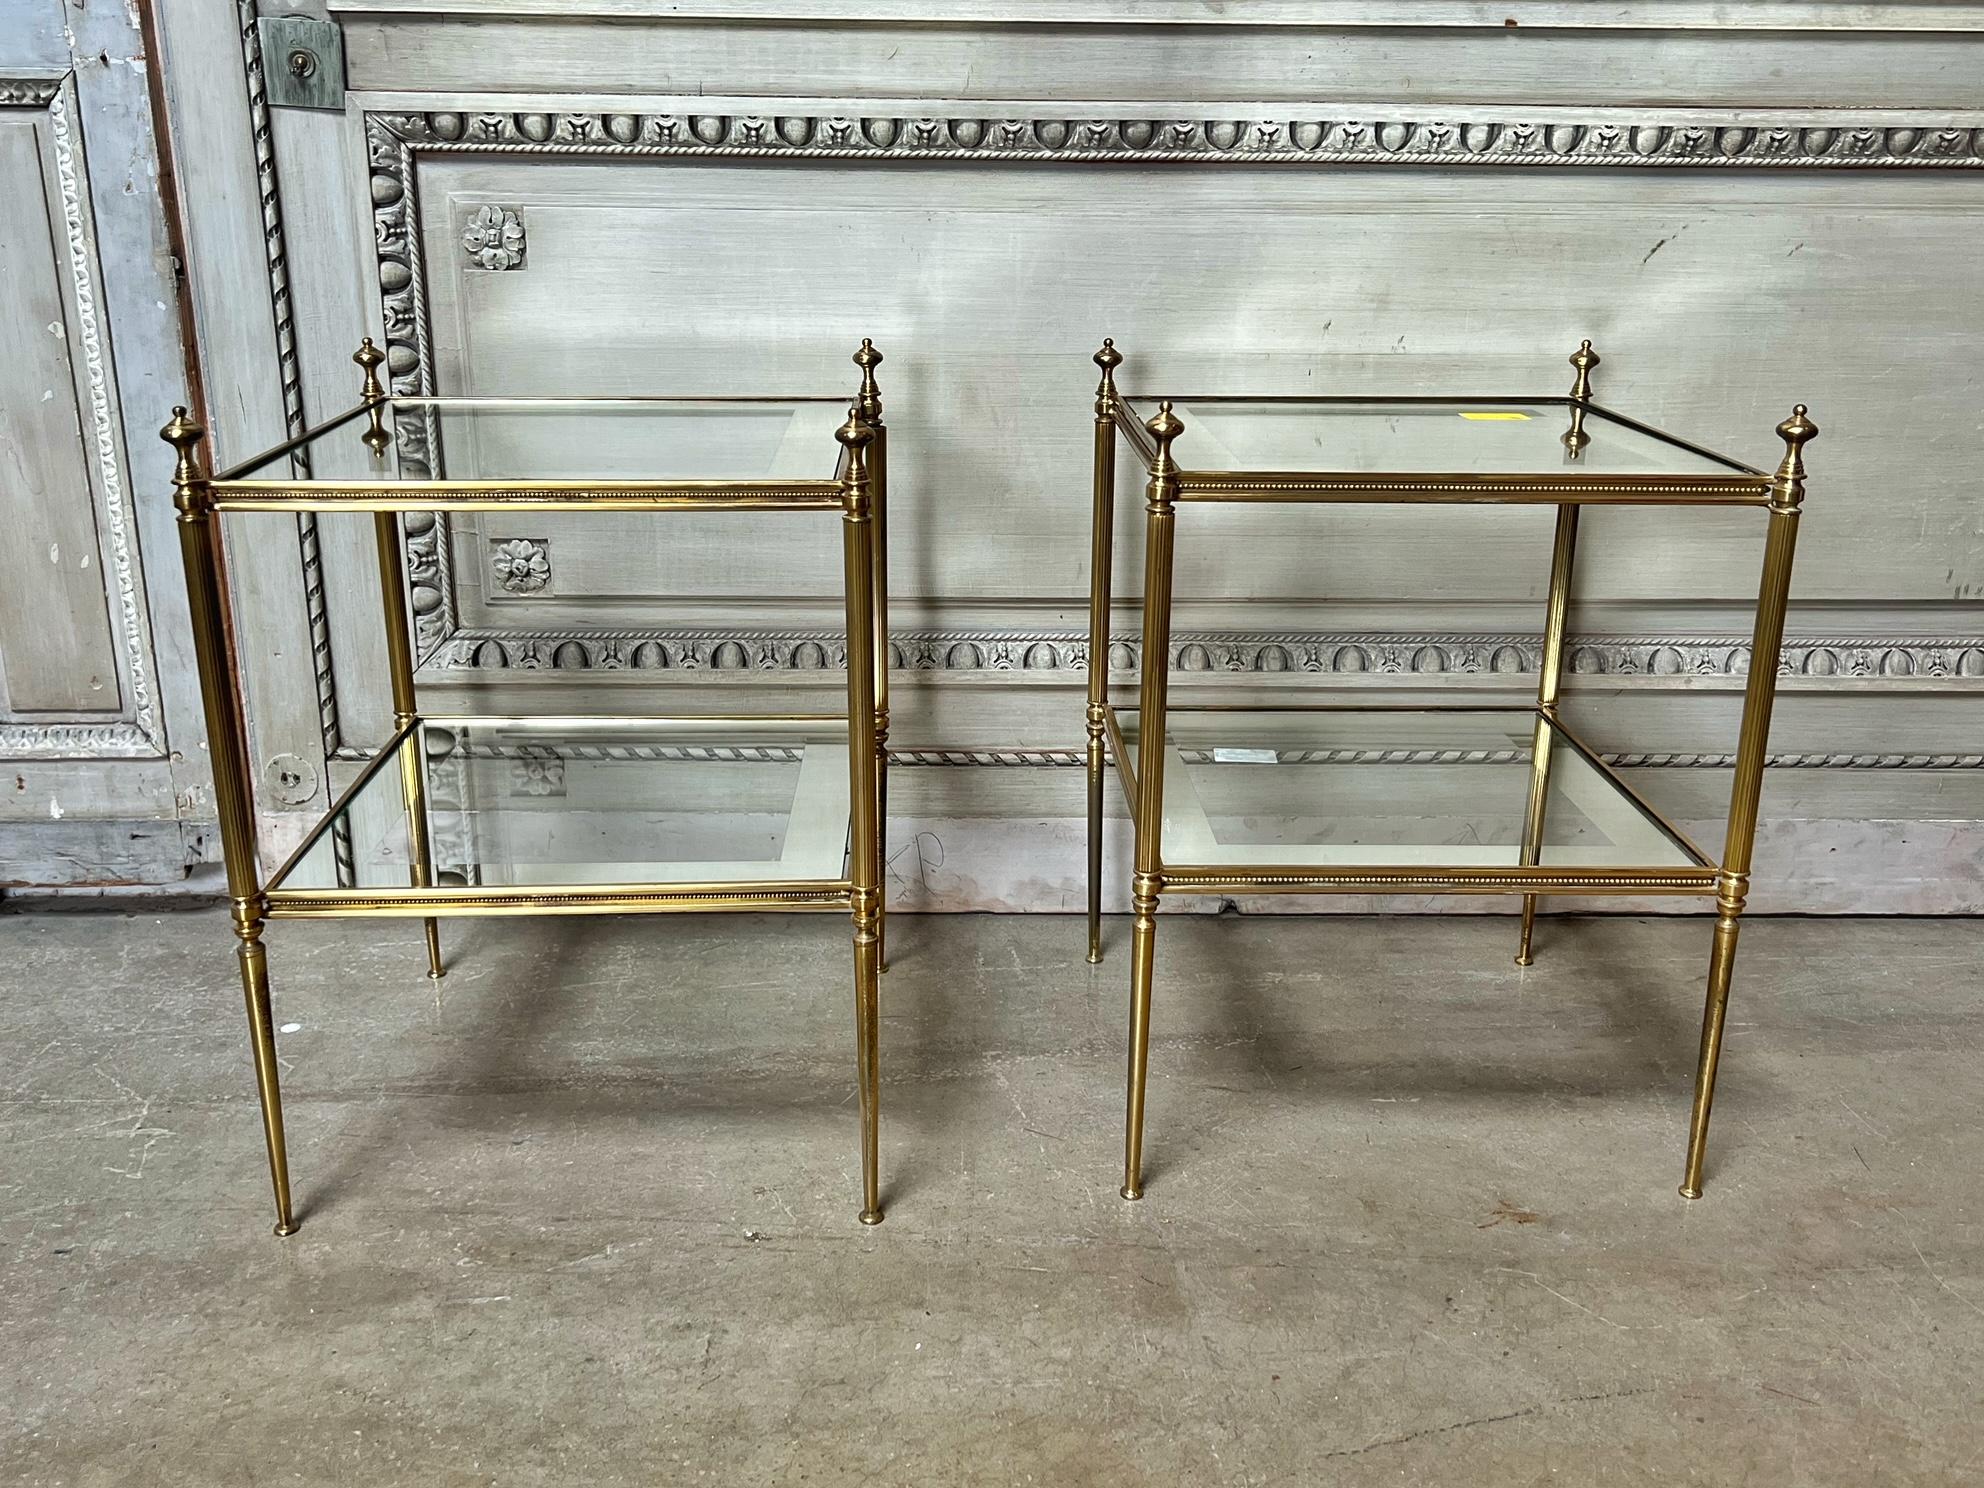 A pair of French polished brass tables with two tiers with glass and mirror tops These functional end tables are nice quality and very decorative and date from the mid to late 20th century.